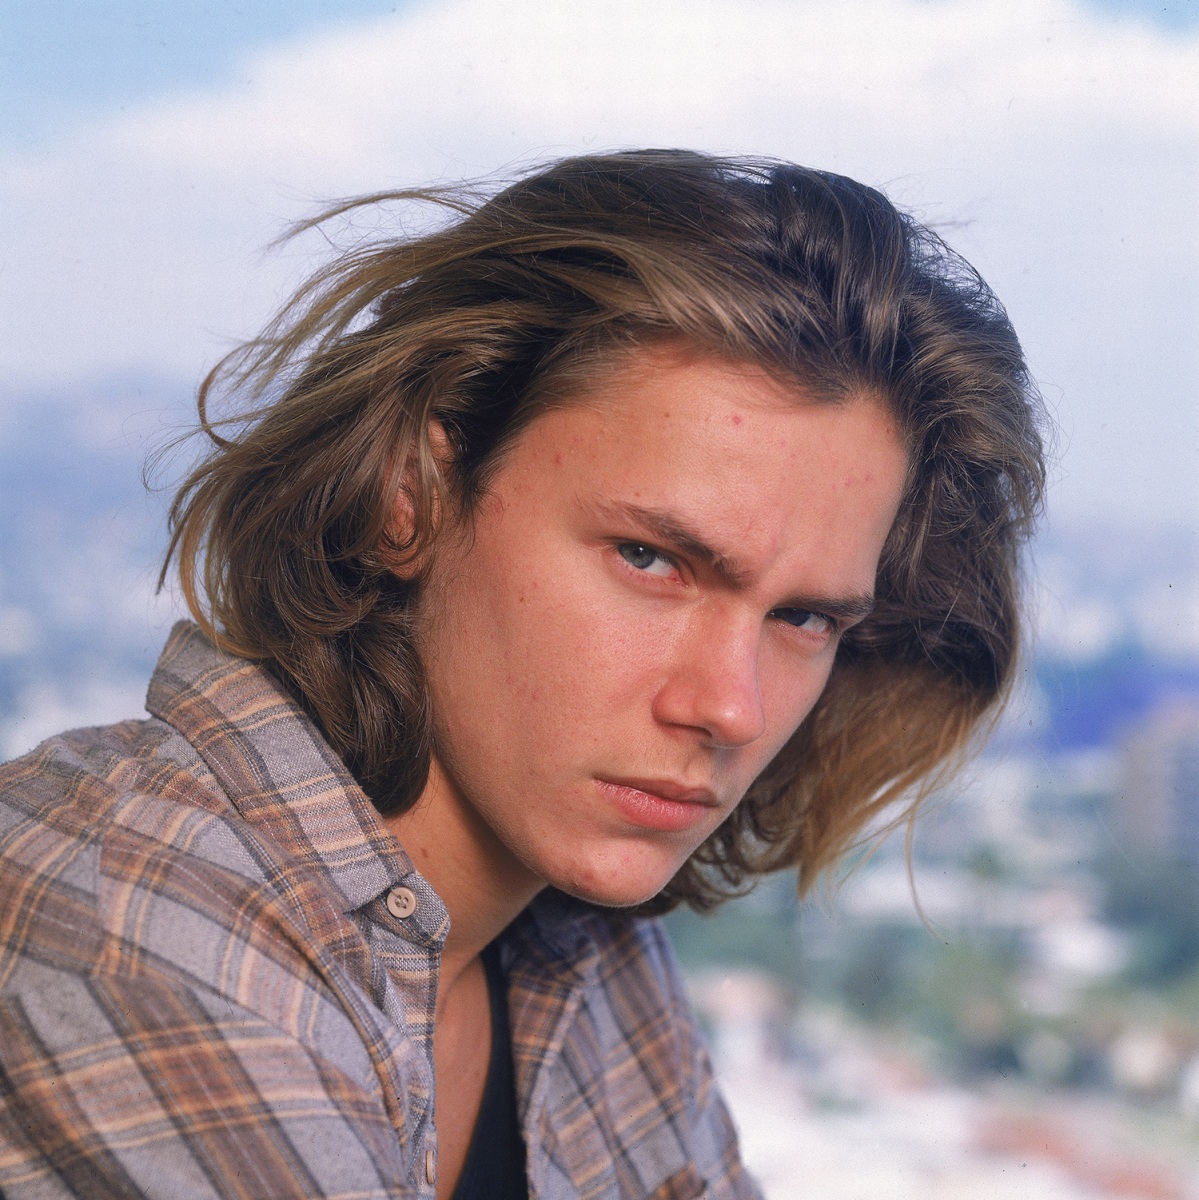 Remembering River Phoenix, and other stars who died too soon - TODAY.com1200 x 1200